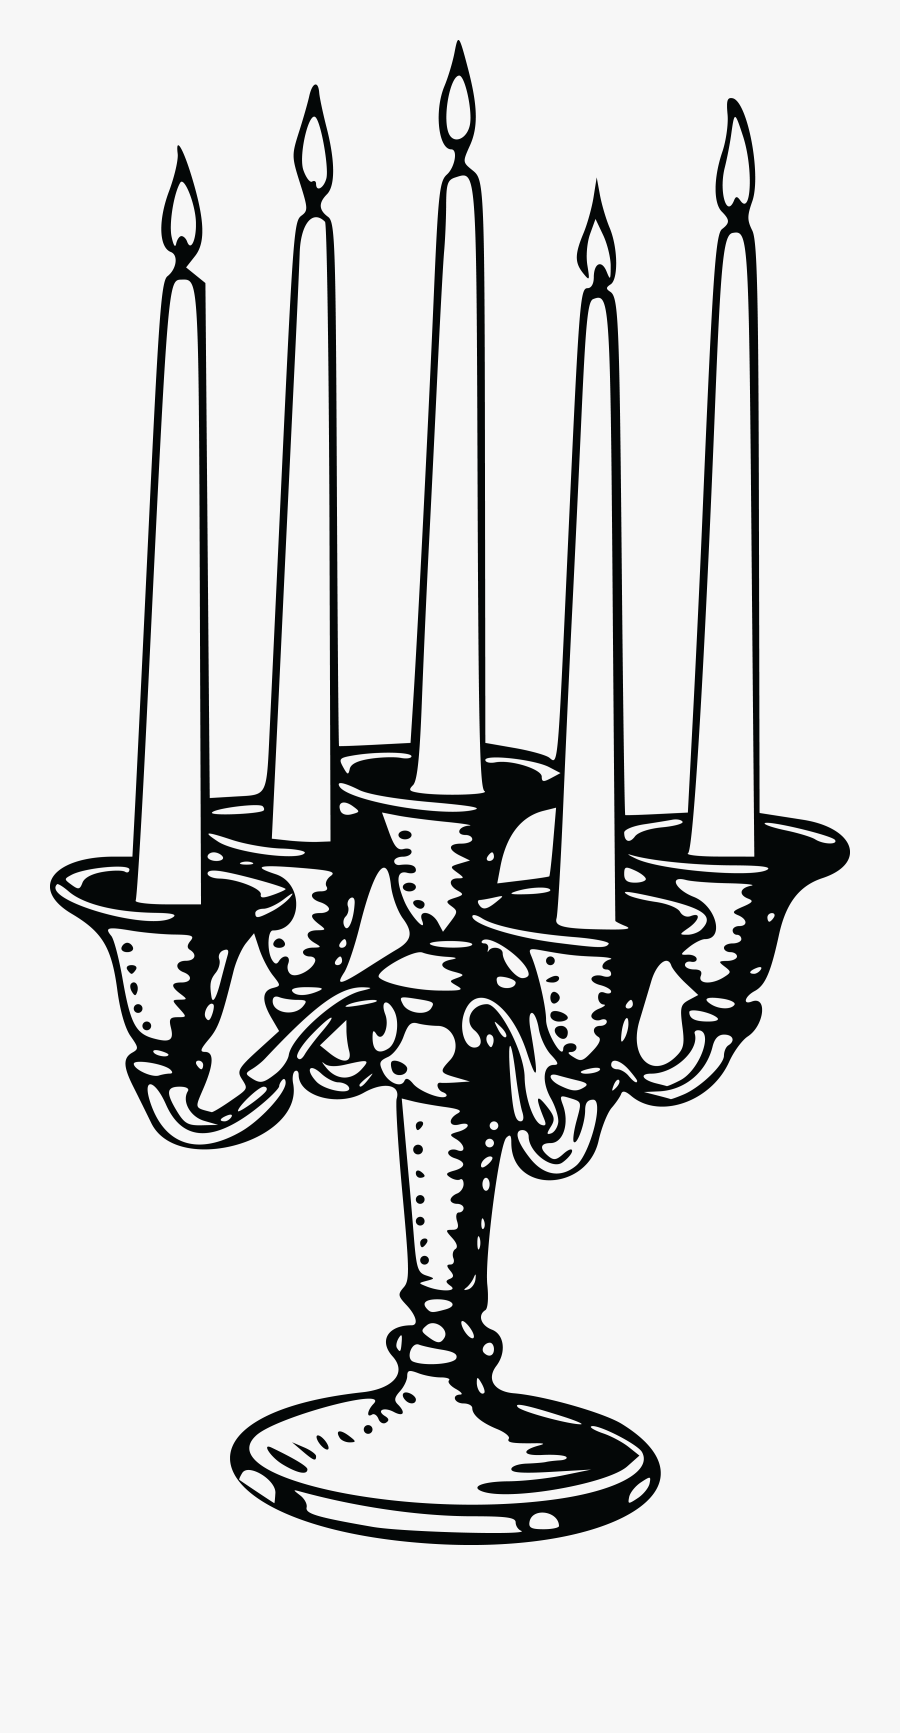 Free Clipart Of A Candle Stick - Candlestick Clipart Black And White, Transparent Clipart